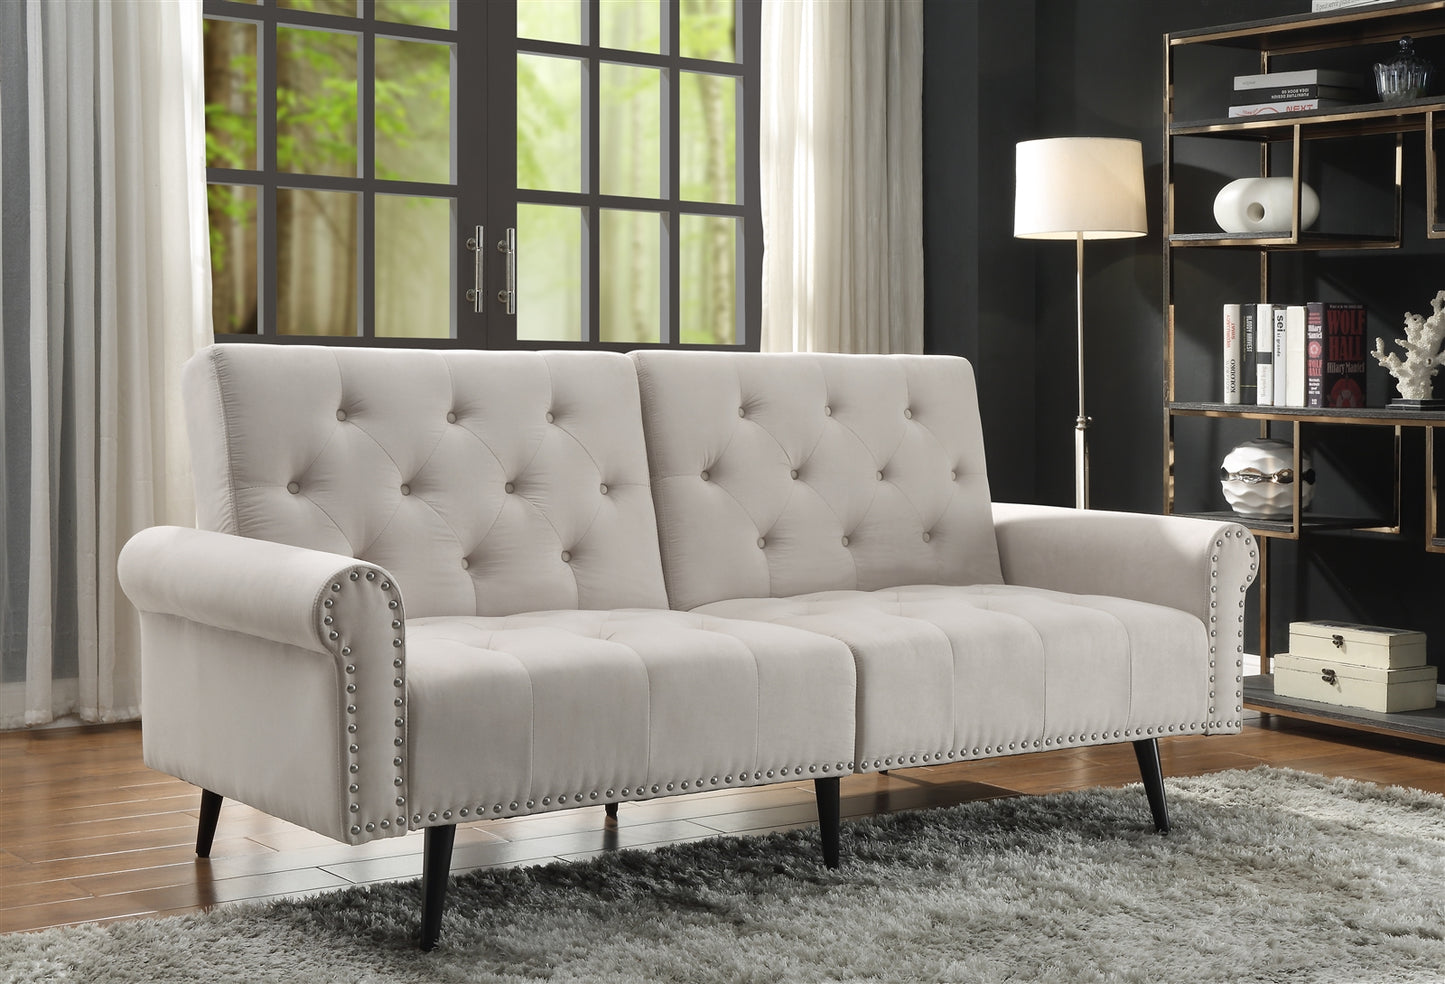 Euro Transitional Sofa Bed in Beige Linen -ACME 58250